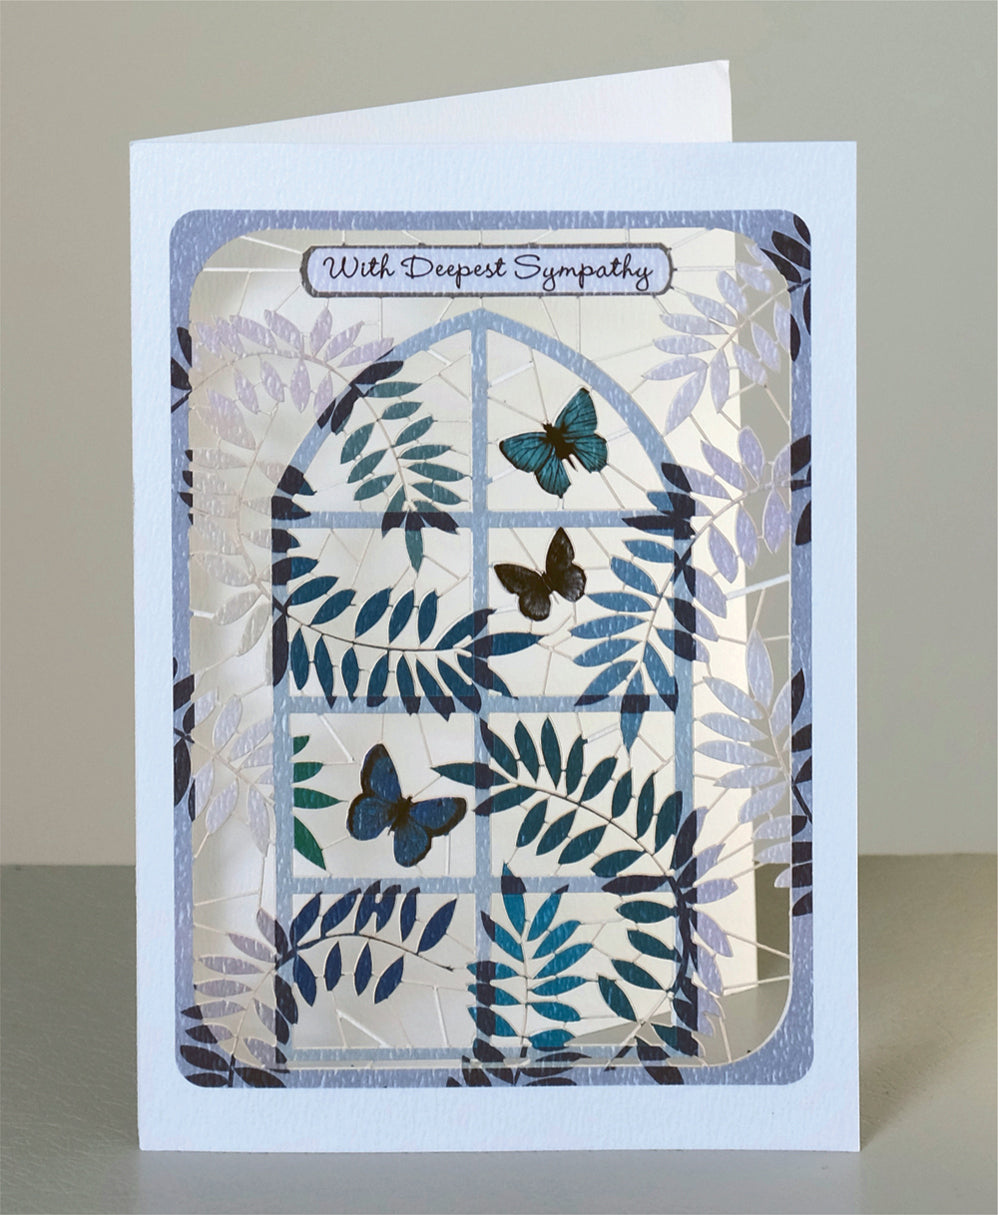 ''With Deepest Sympathy'' - Butterflies in Window - Sympathy Card - #PM-817